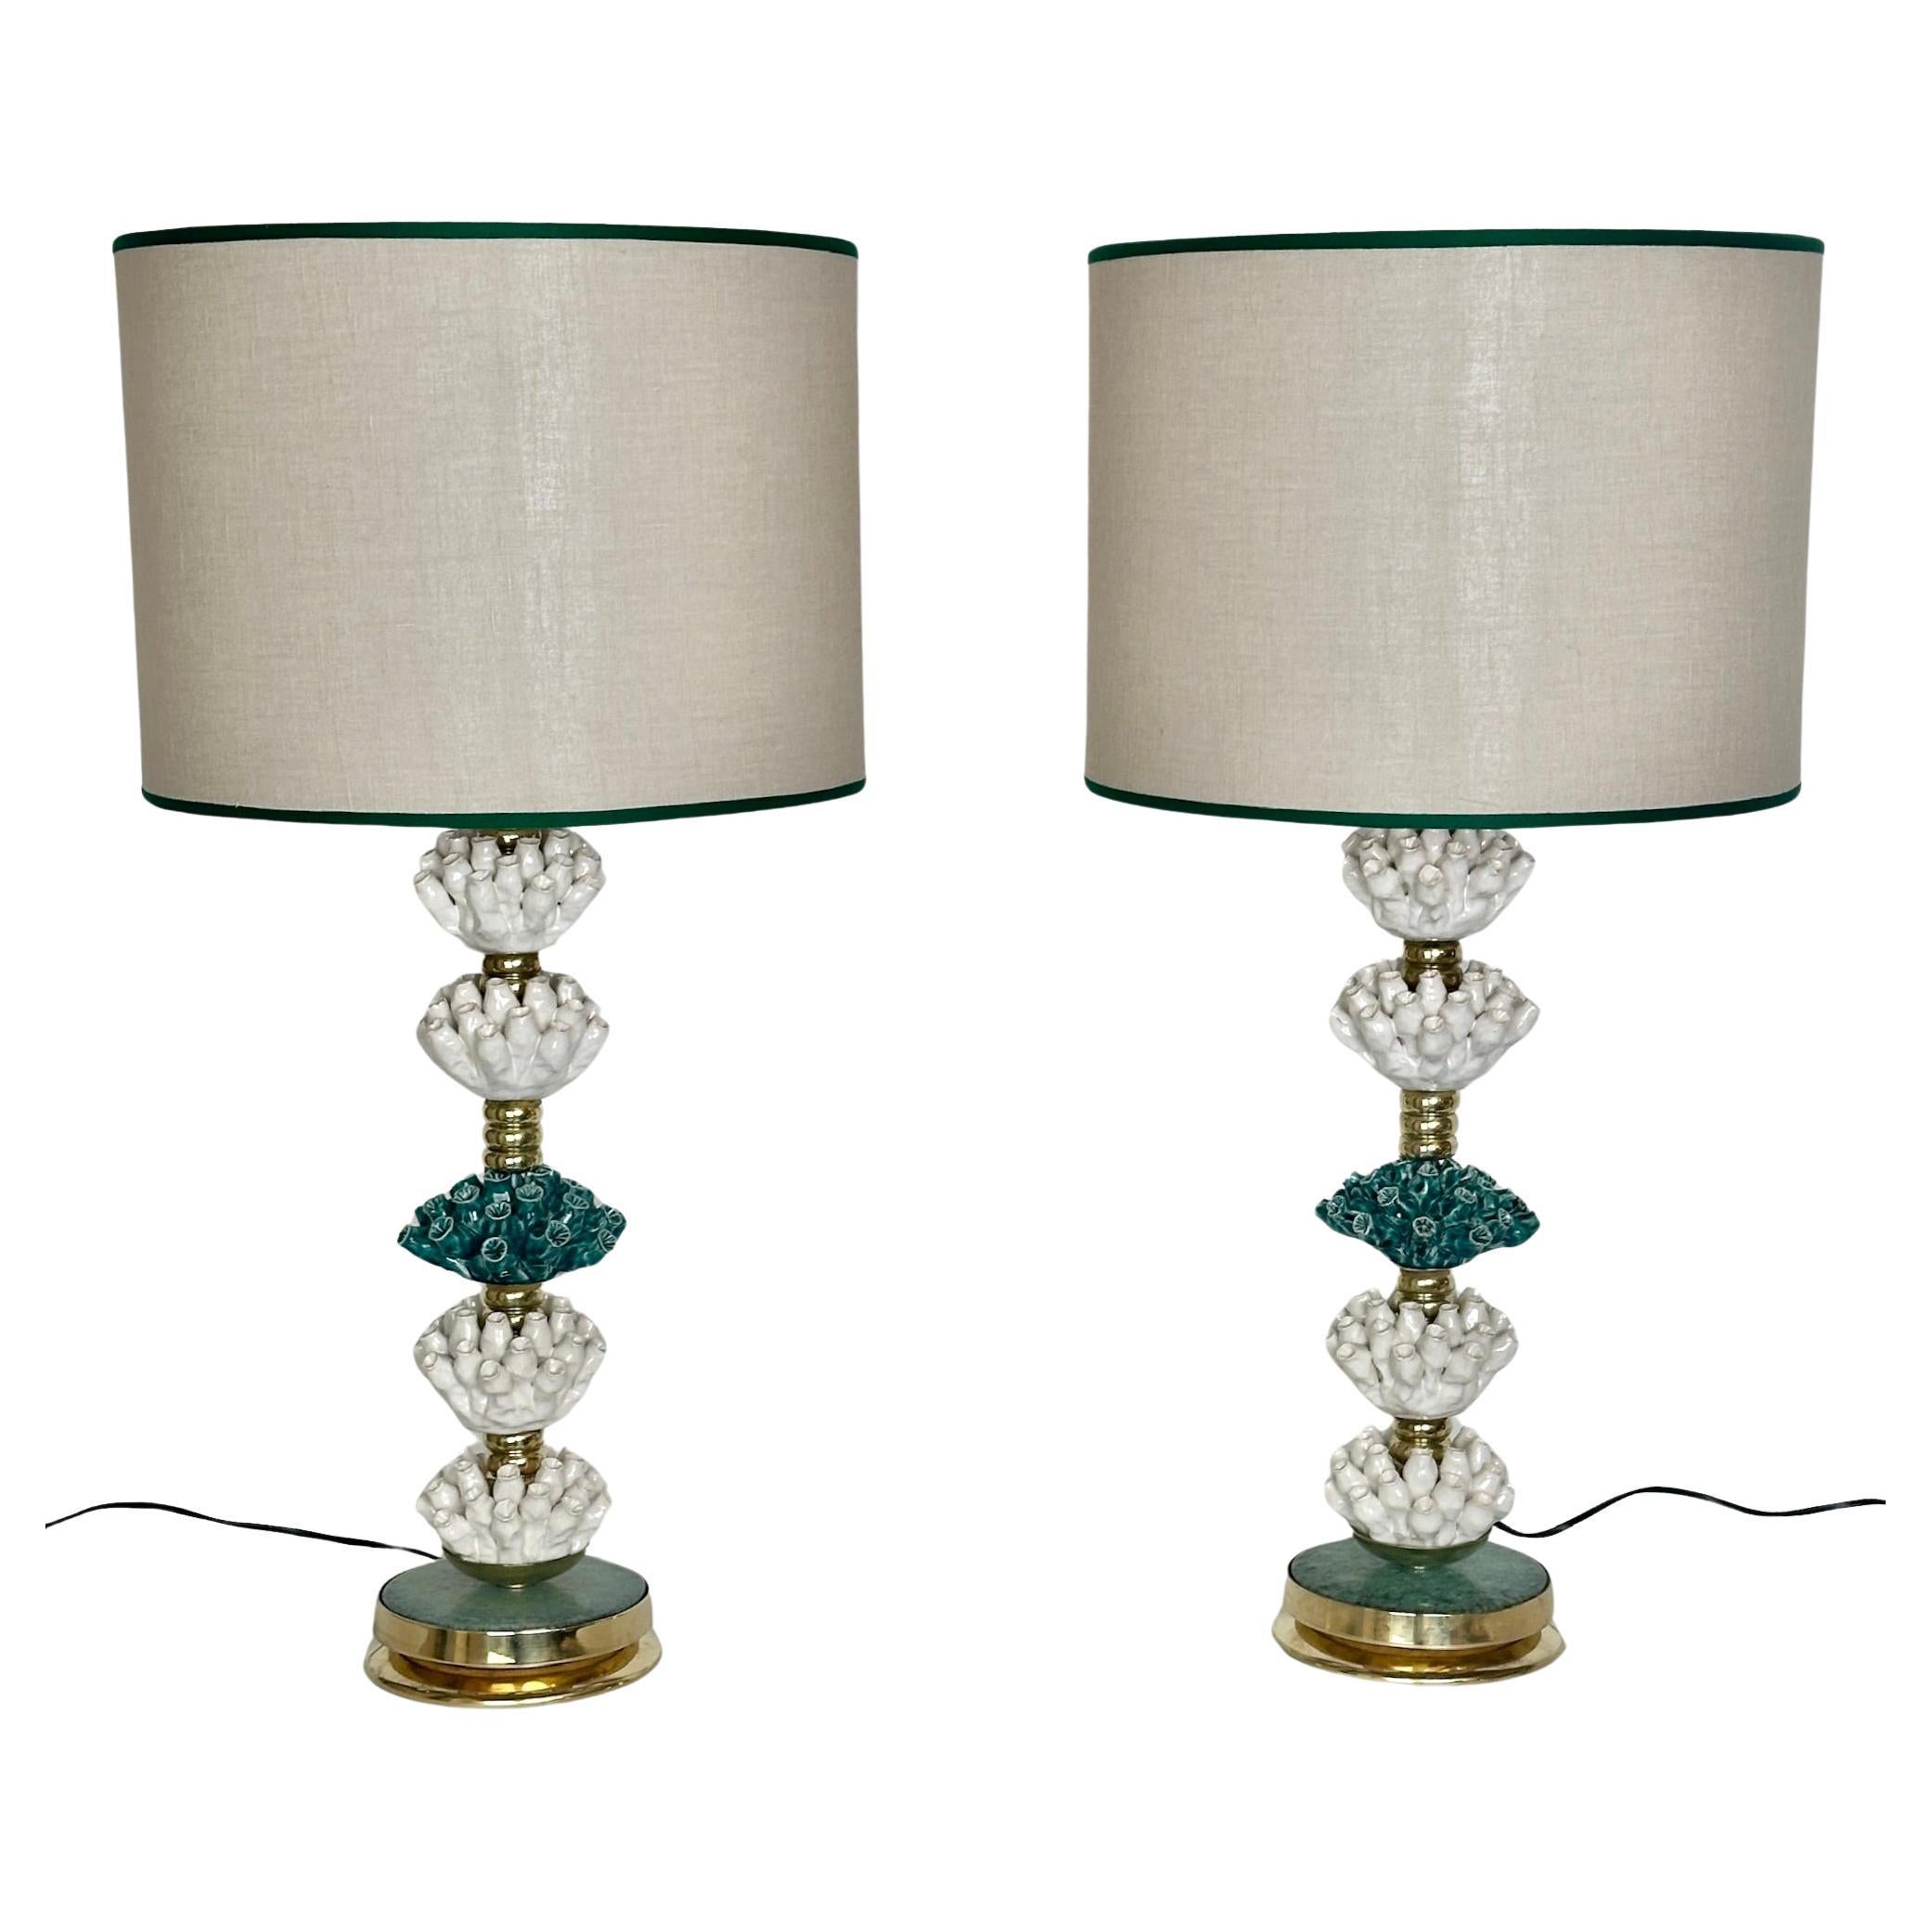 Late 20th Century Pair of Italian Brass w/ Green & White Ceramic Table Lamps